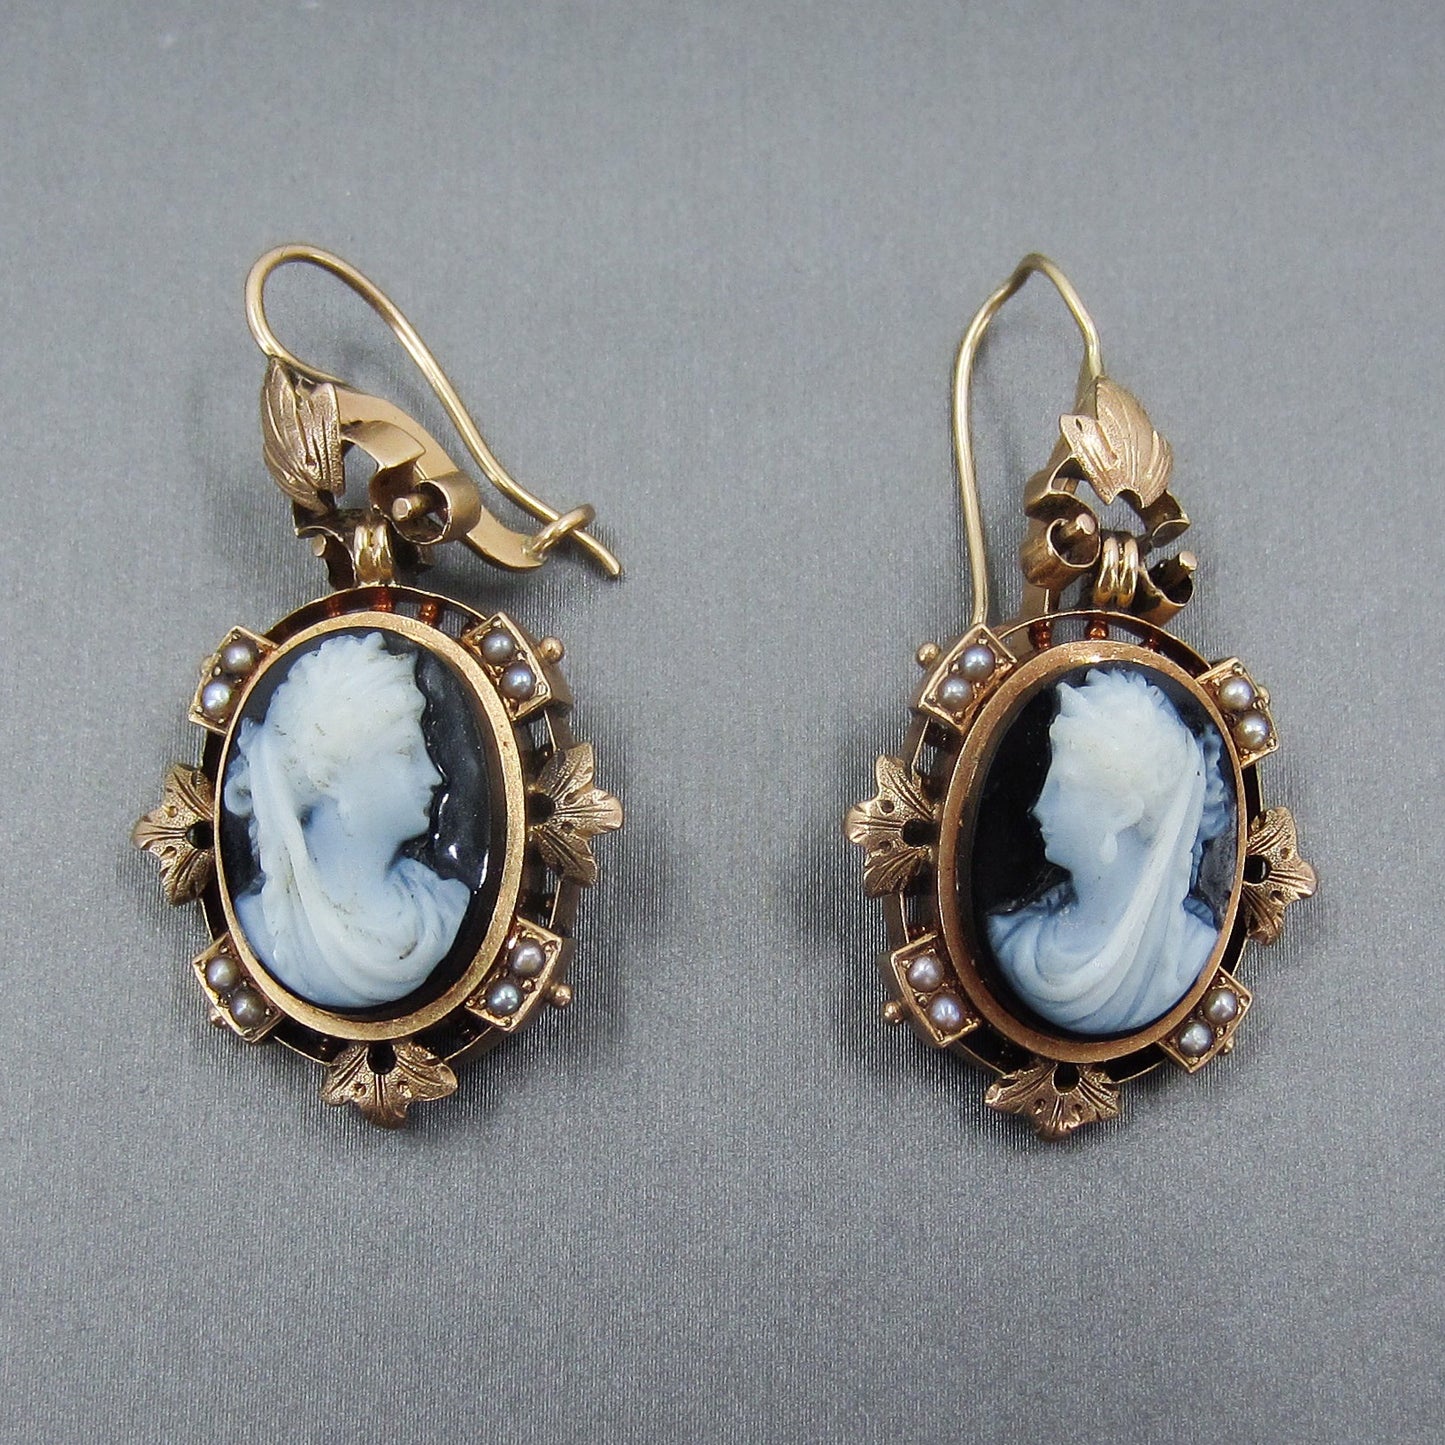 SOLD— Victorian Hardstone Cameo and Pearl Earrings 14k c. 1880